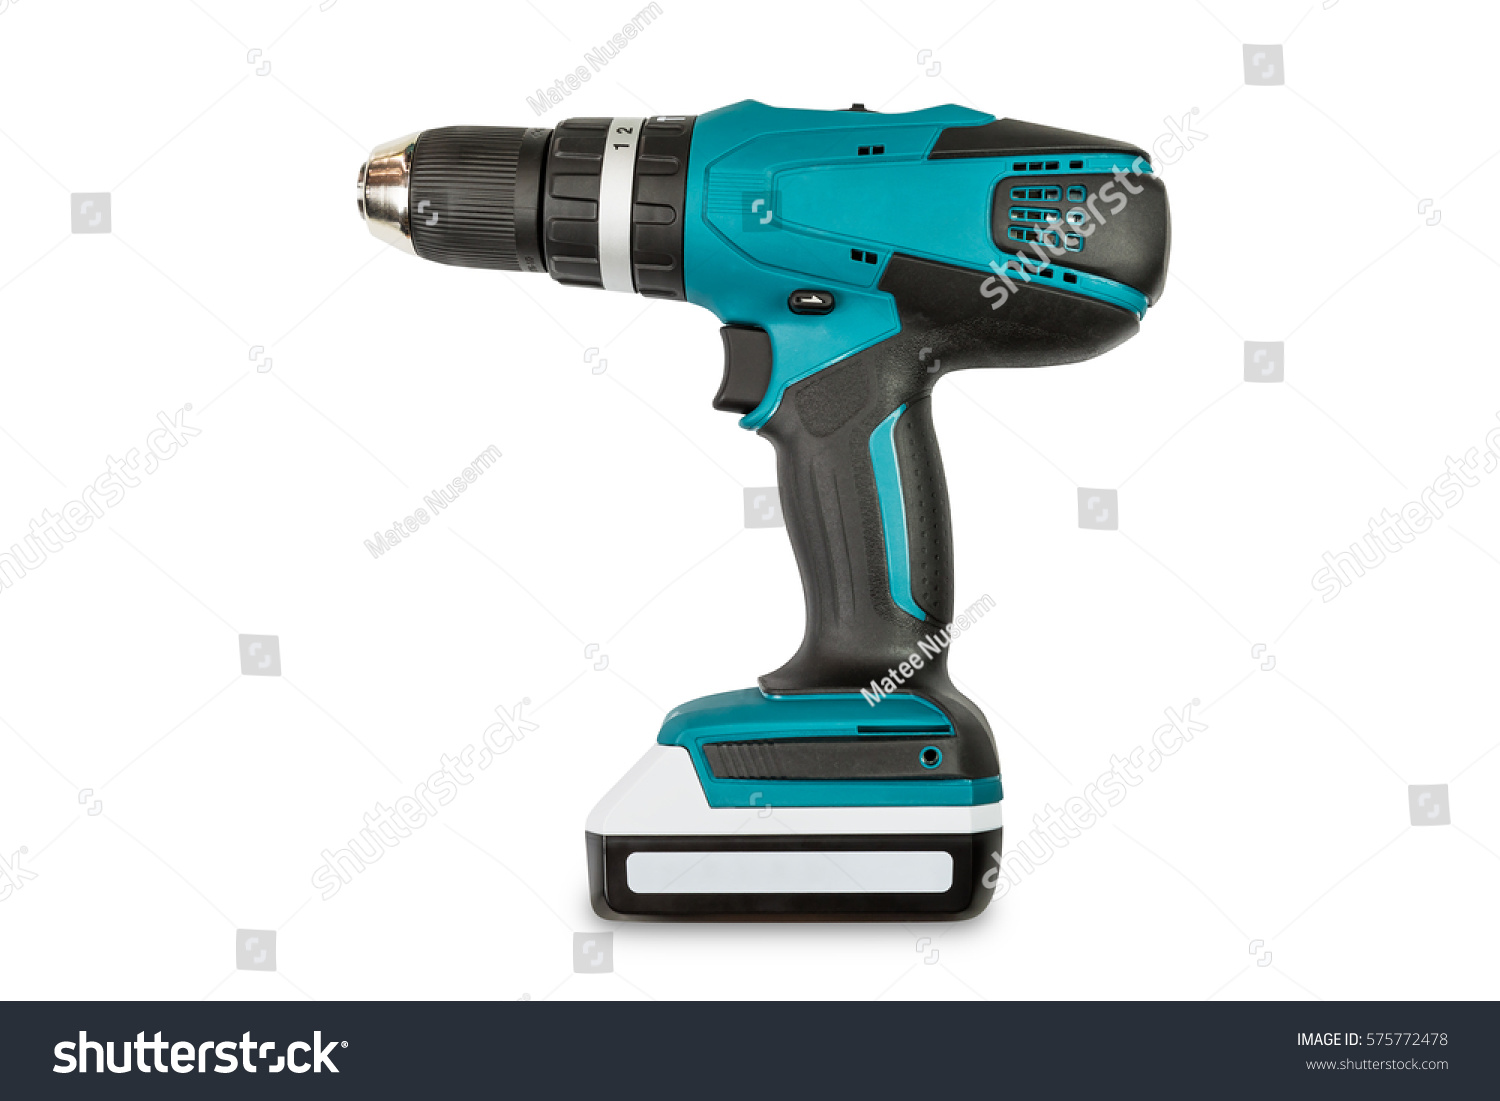 Teal color cordless combi drill, can be used as normal drill, impact drill and screw driver, isolated on white background with clipping path #575772478